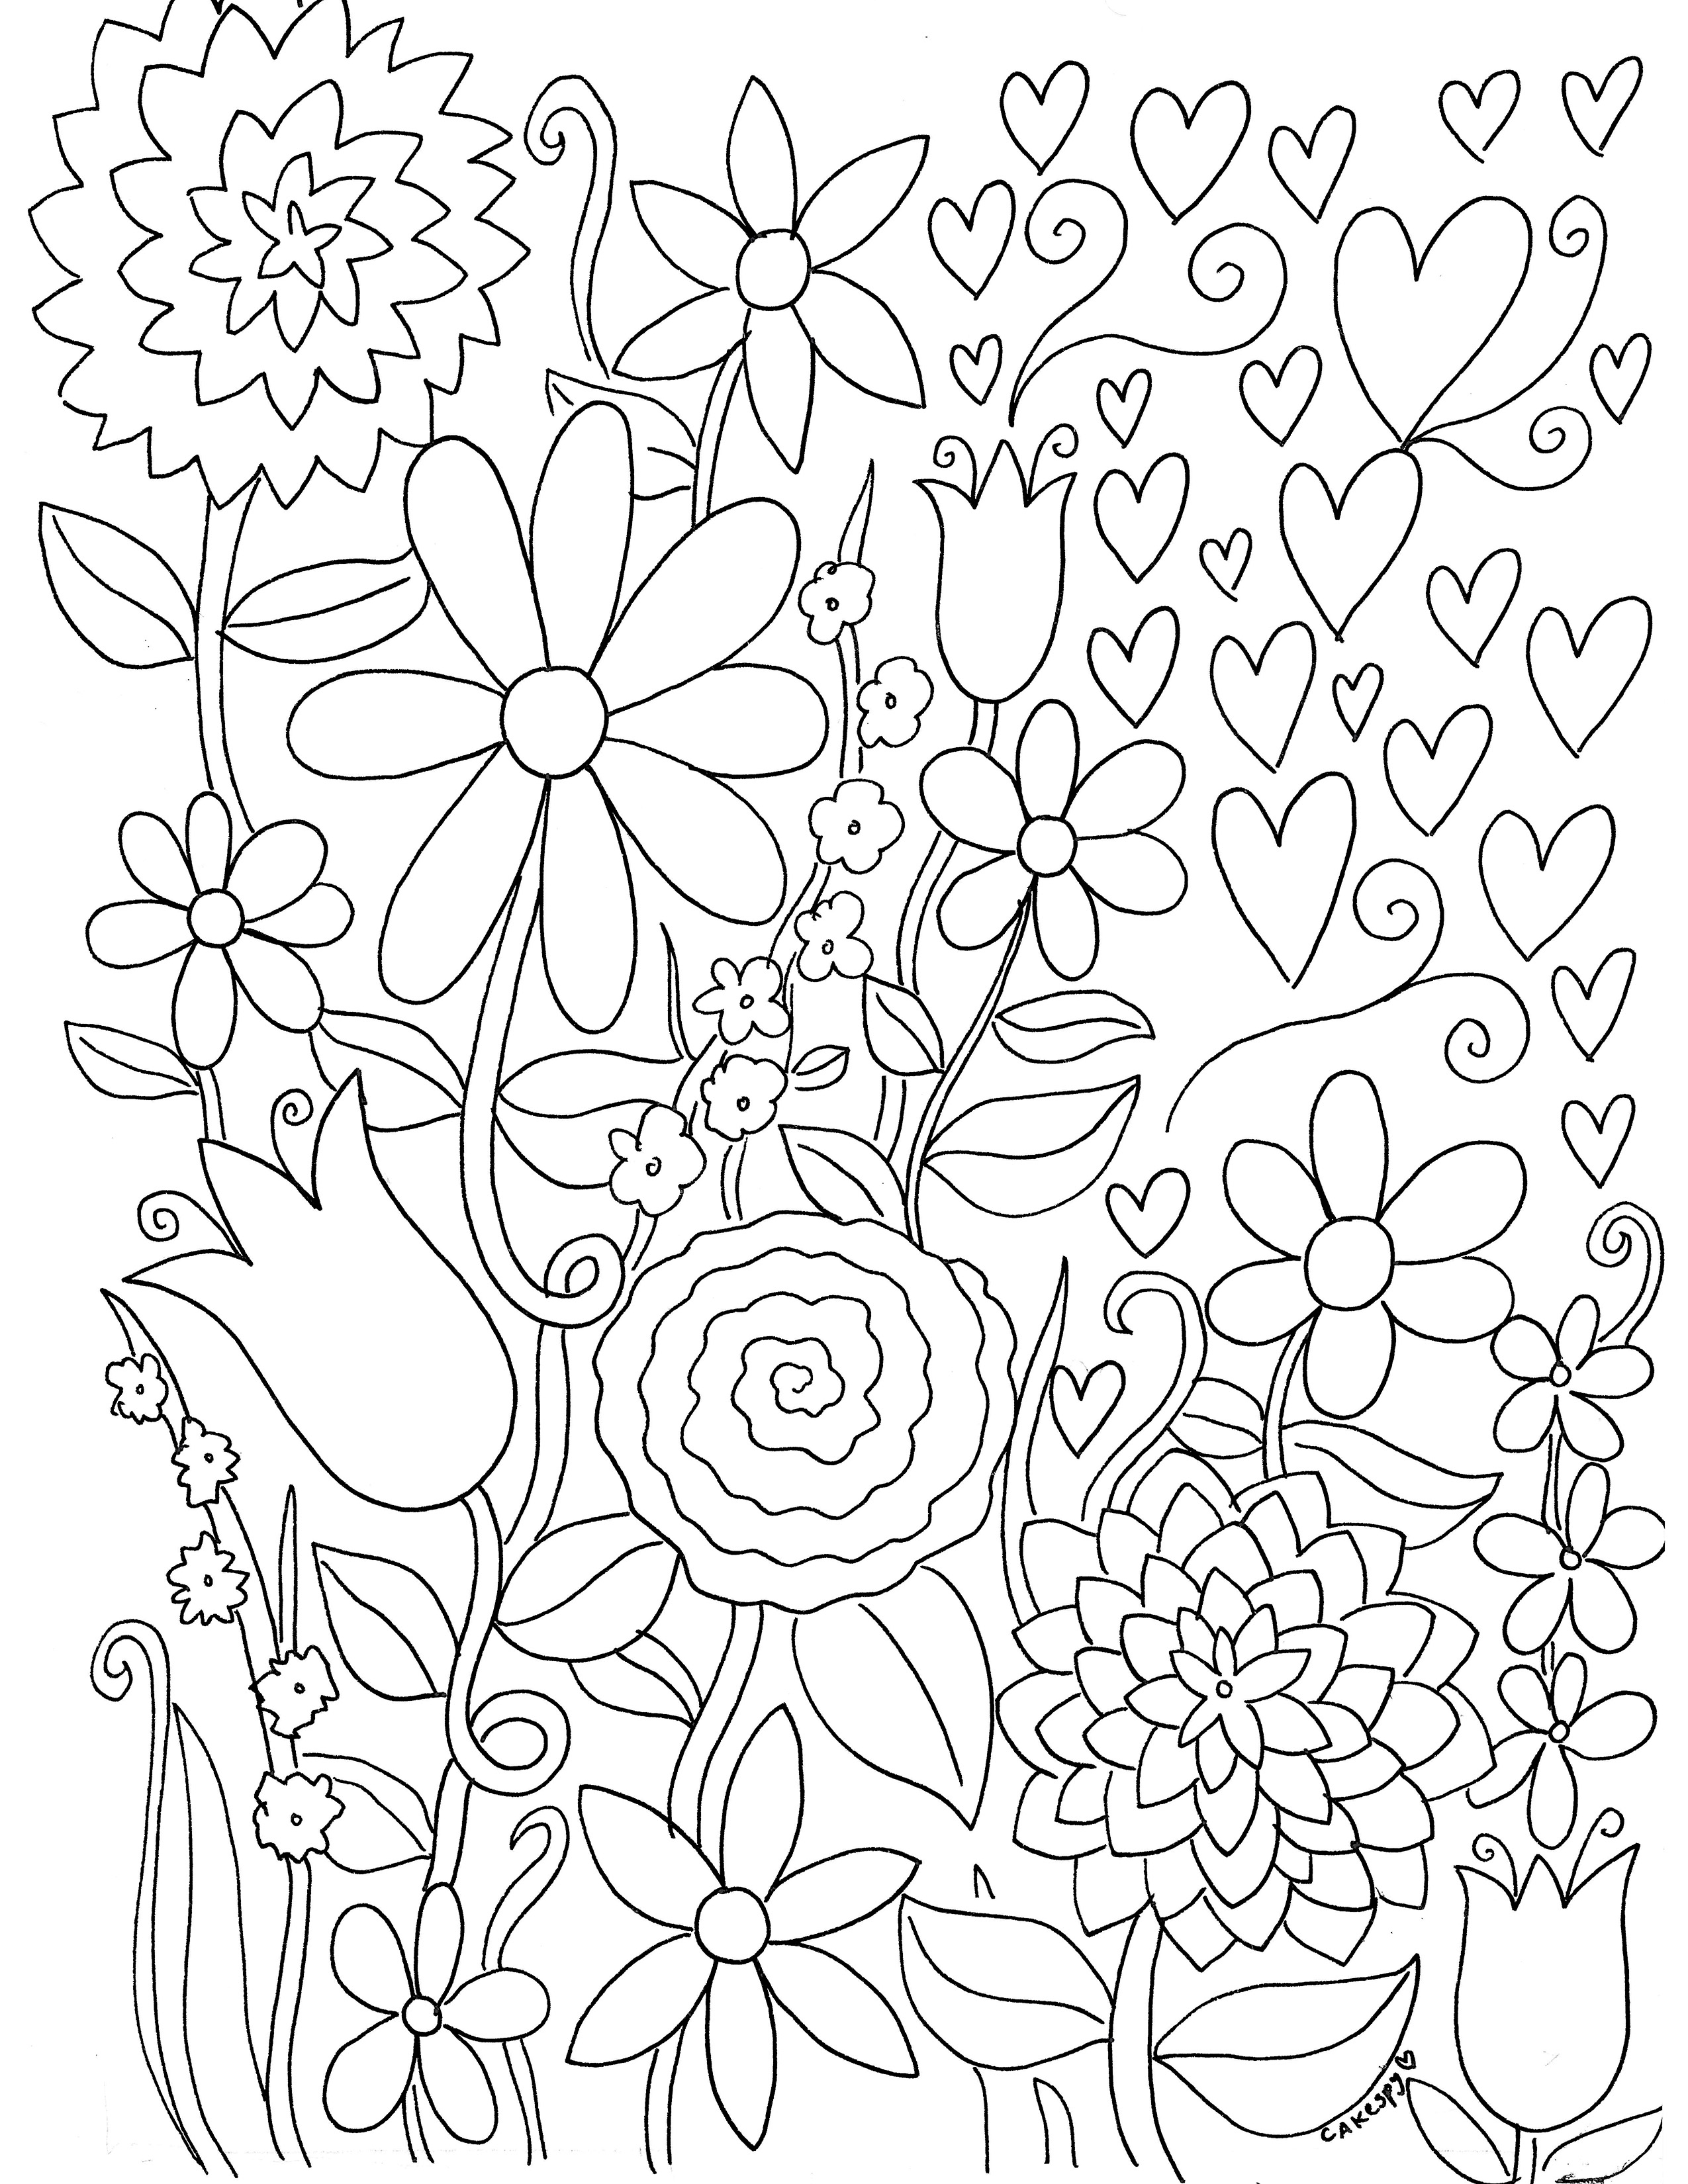 anxiety-coloring-pages-coloring-pages